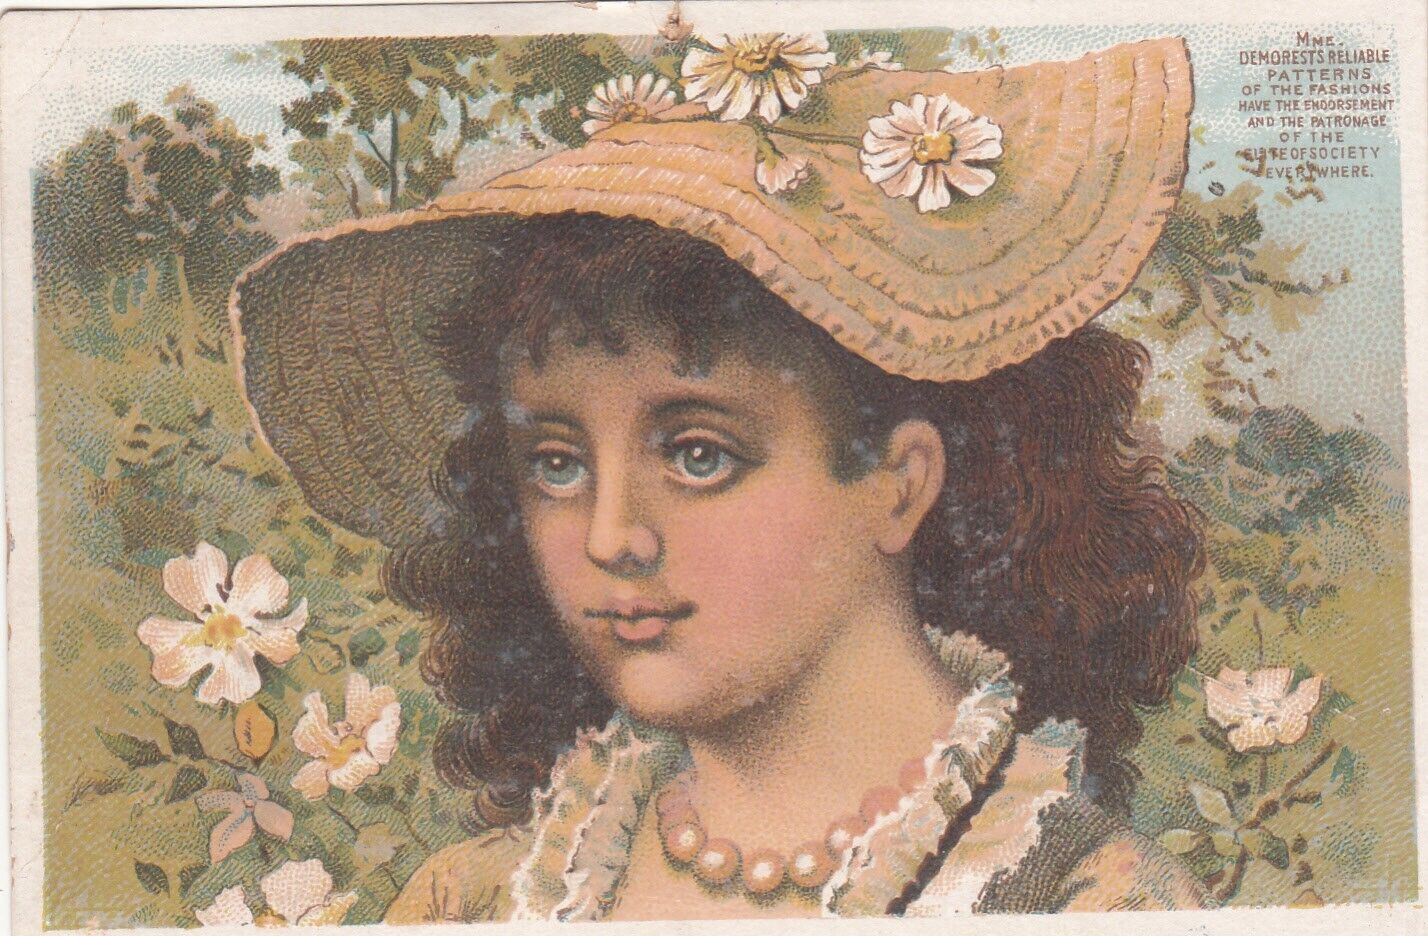 Demorest Reliable Patterns Girl with Floppy Straw Hat Daisies Vict Card c1880s